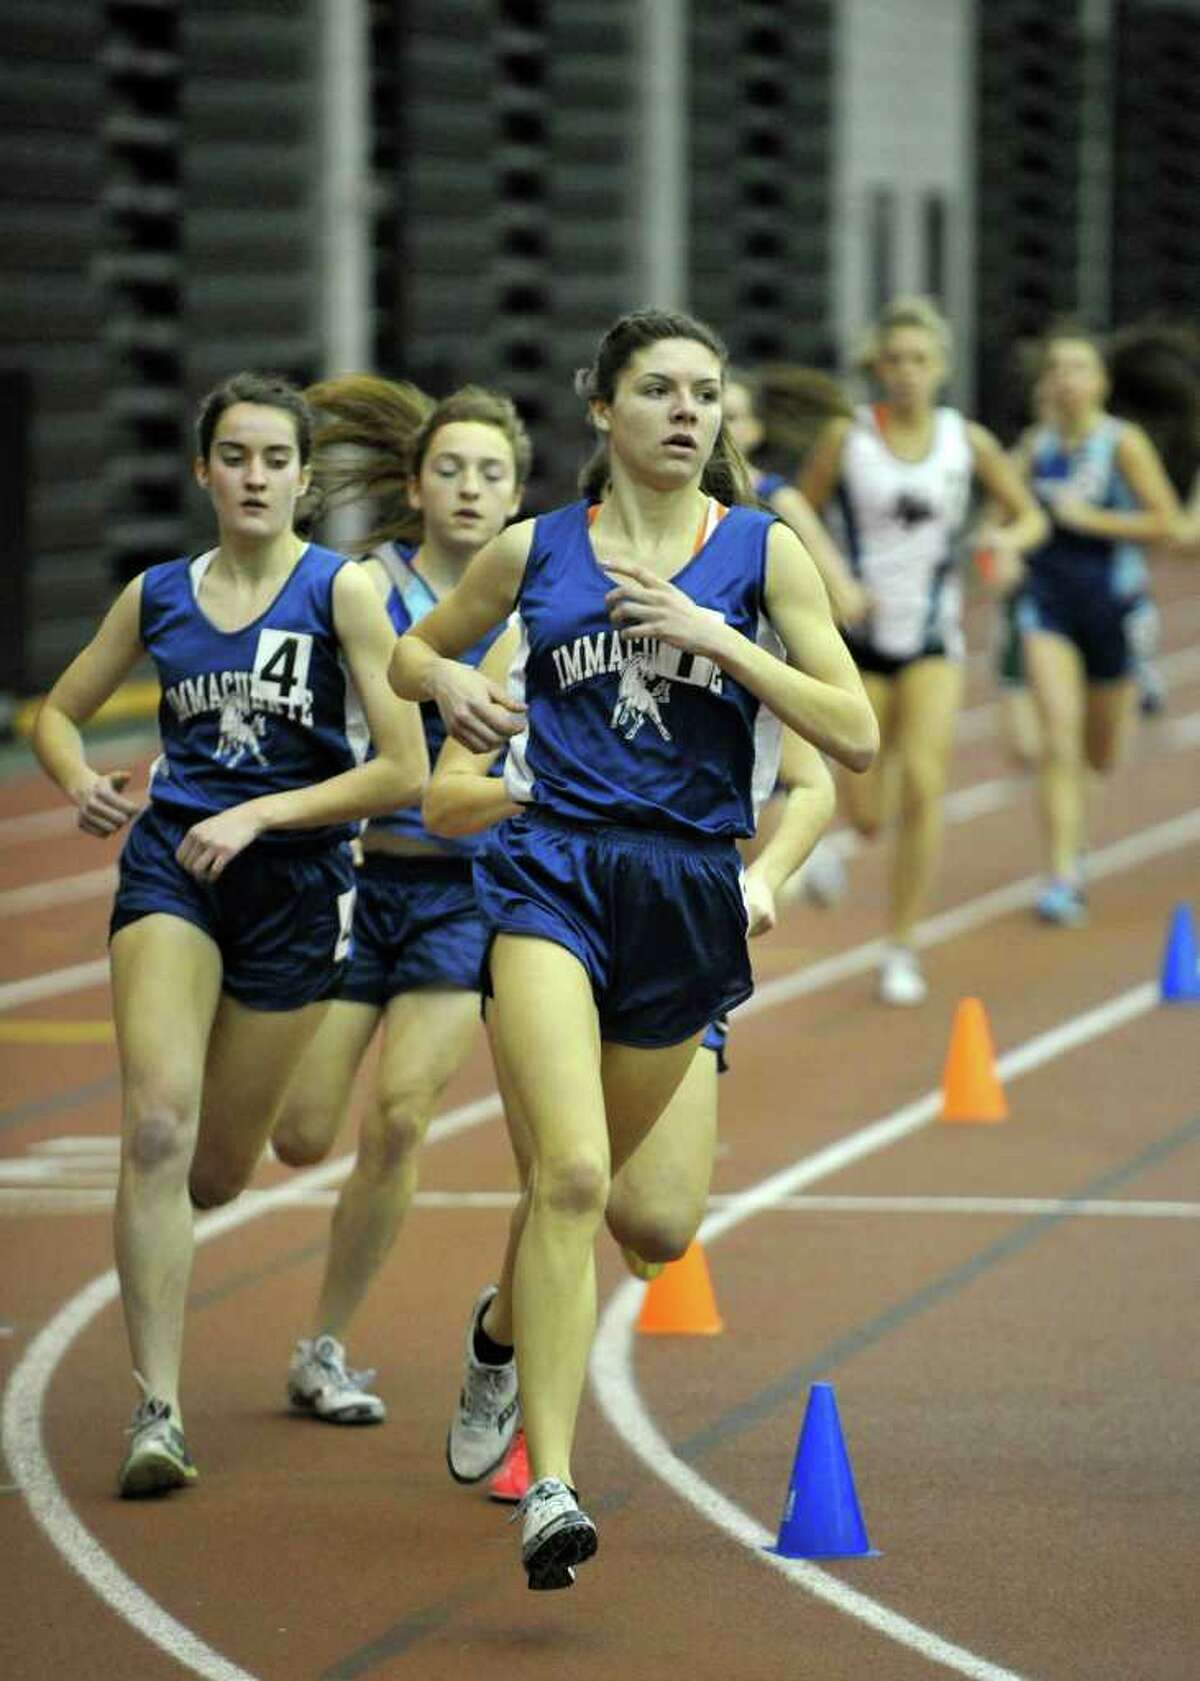 Immaculate's Maggie Christe leads the pack in the 1600-meter-run during the SWC indoor track and field championships at Hillhouse High School in New Haven on Saturday, Feb. 4, 2012. Christe set the SWC championship record for the 1600 meter-run.